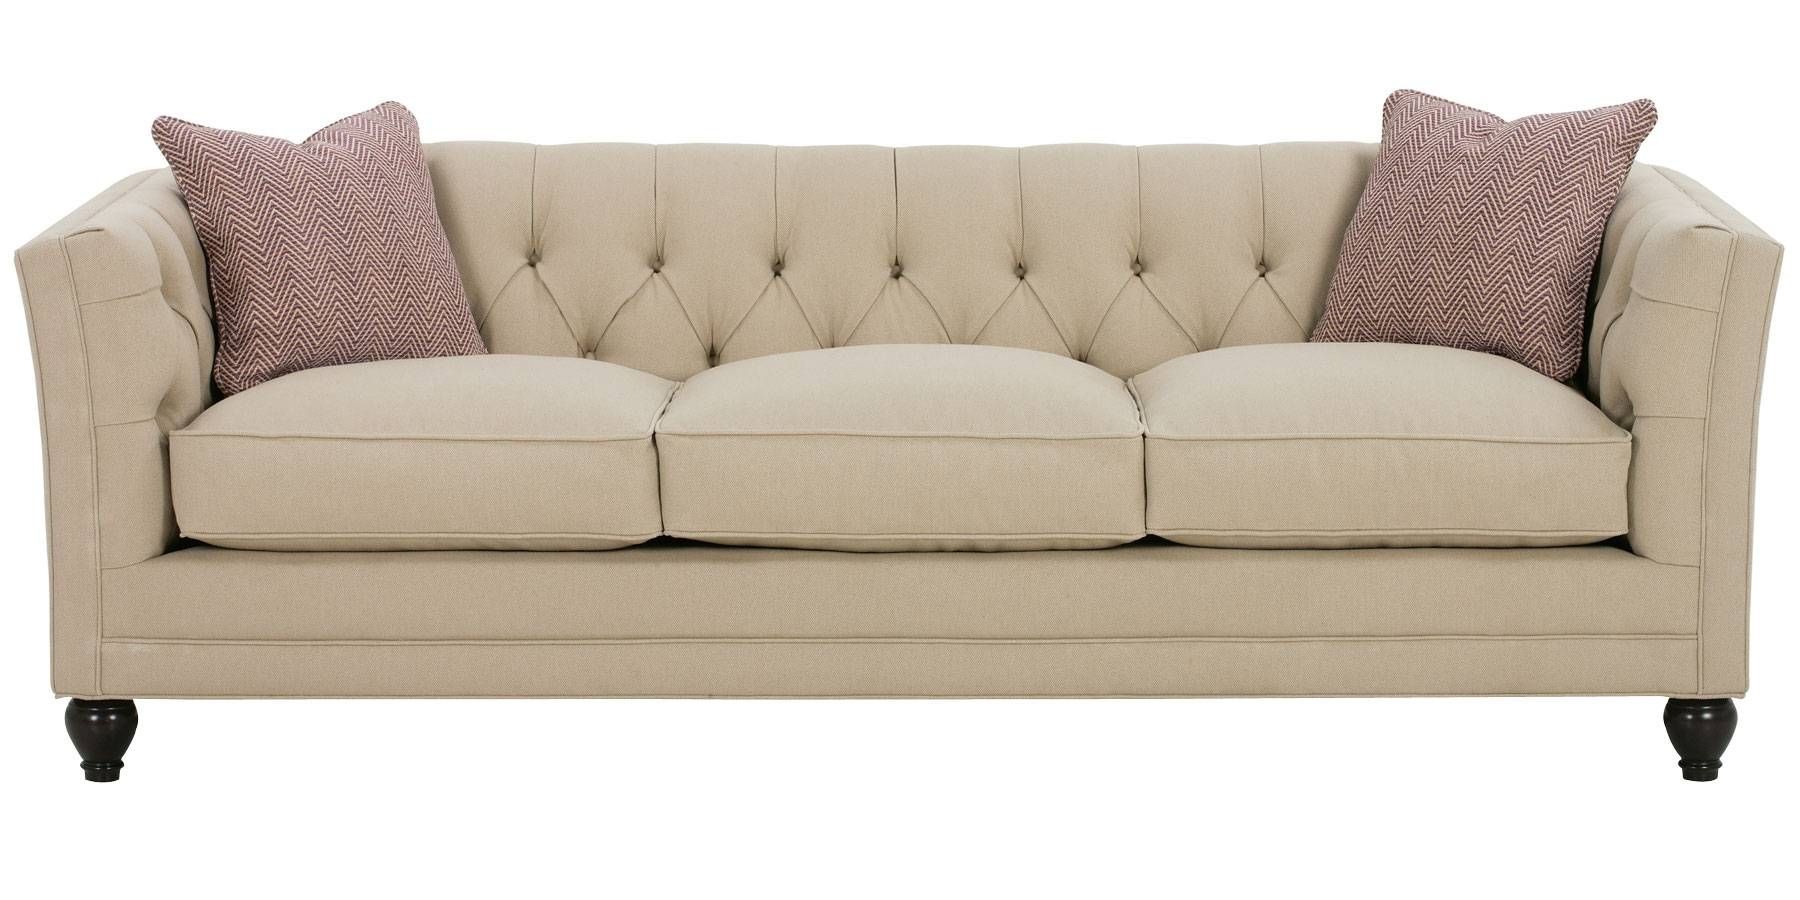 Sofas Center : Black Fabric Sofas For Sale Cream Chesterfield Within Traditional Sofas For Sale (Photo 29 of 30)